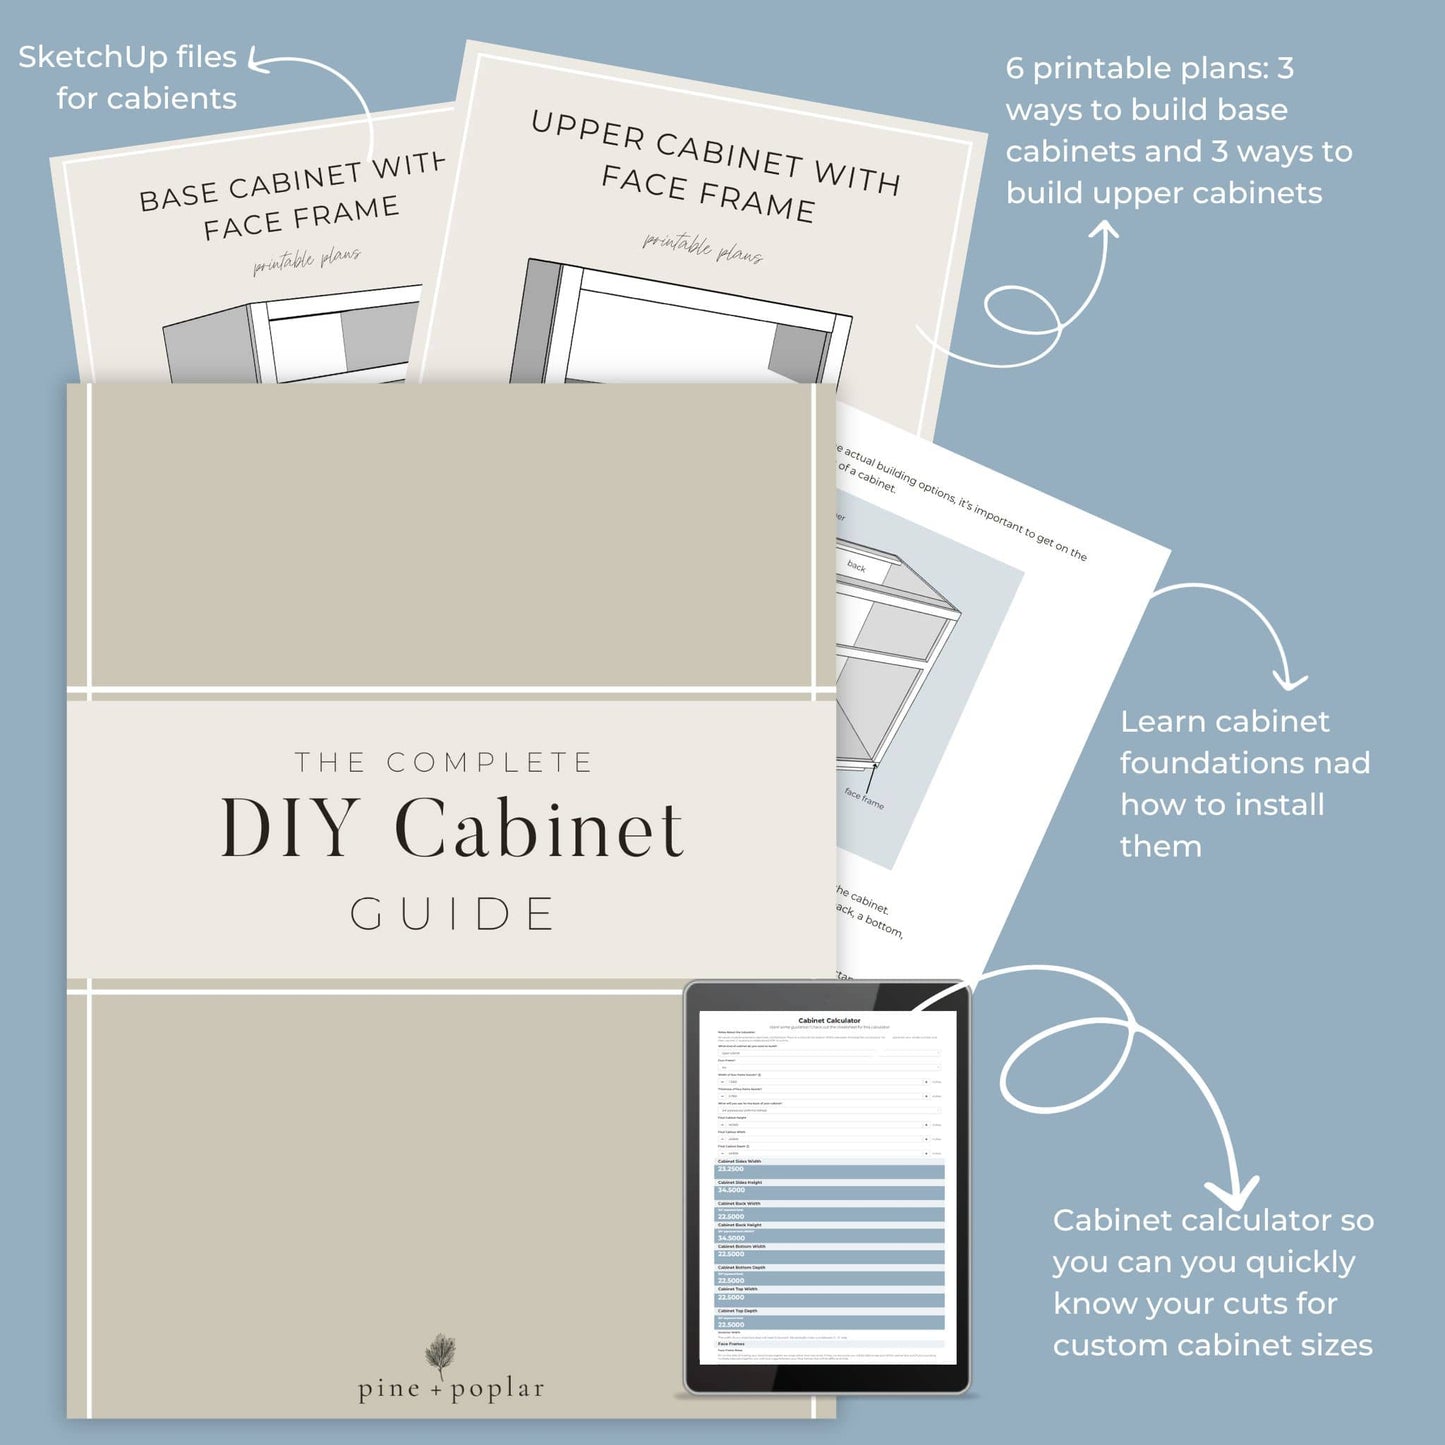 The DIY Cabinet Guide